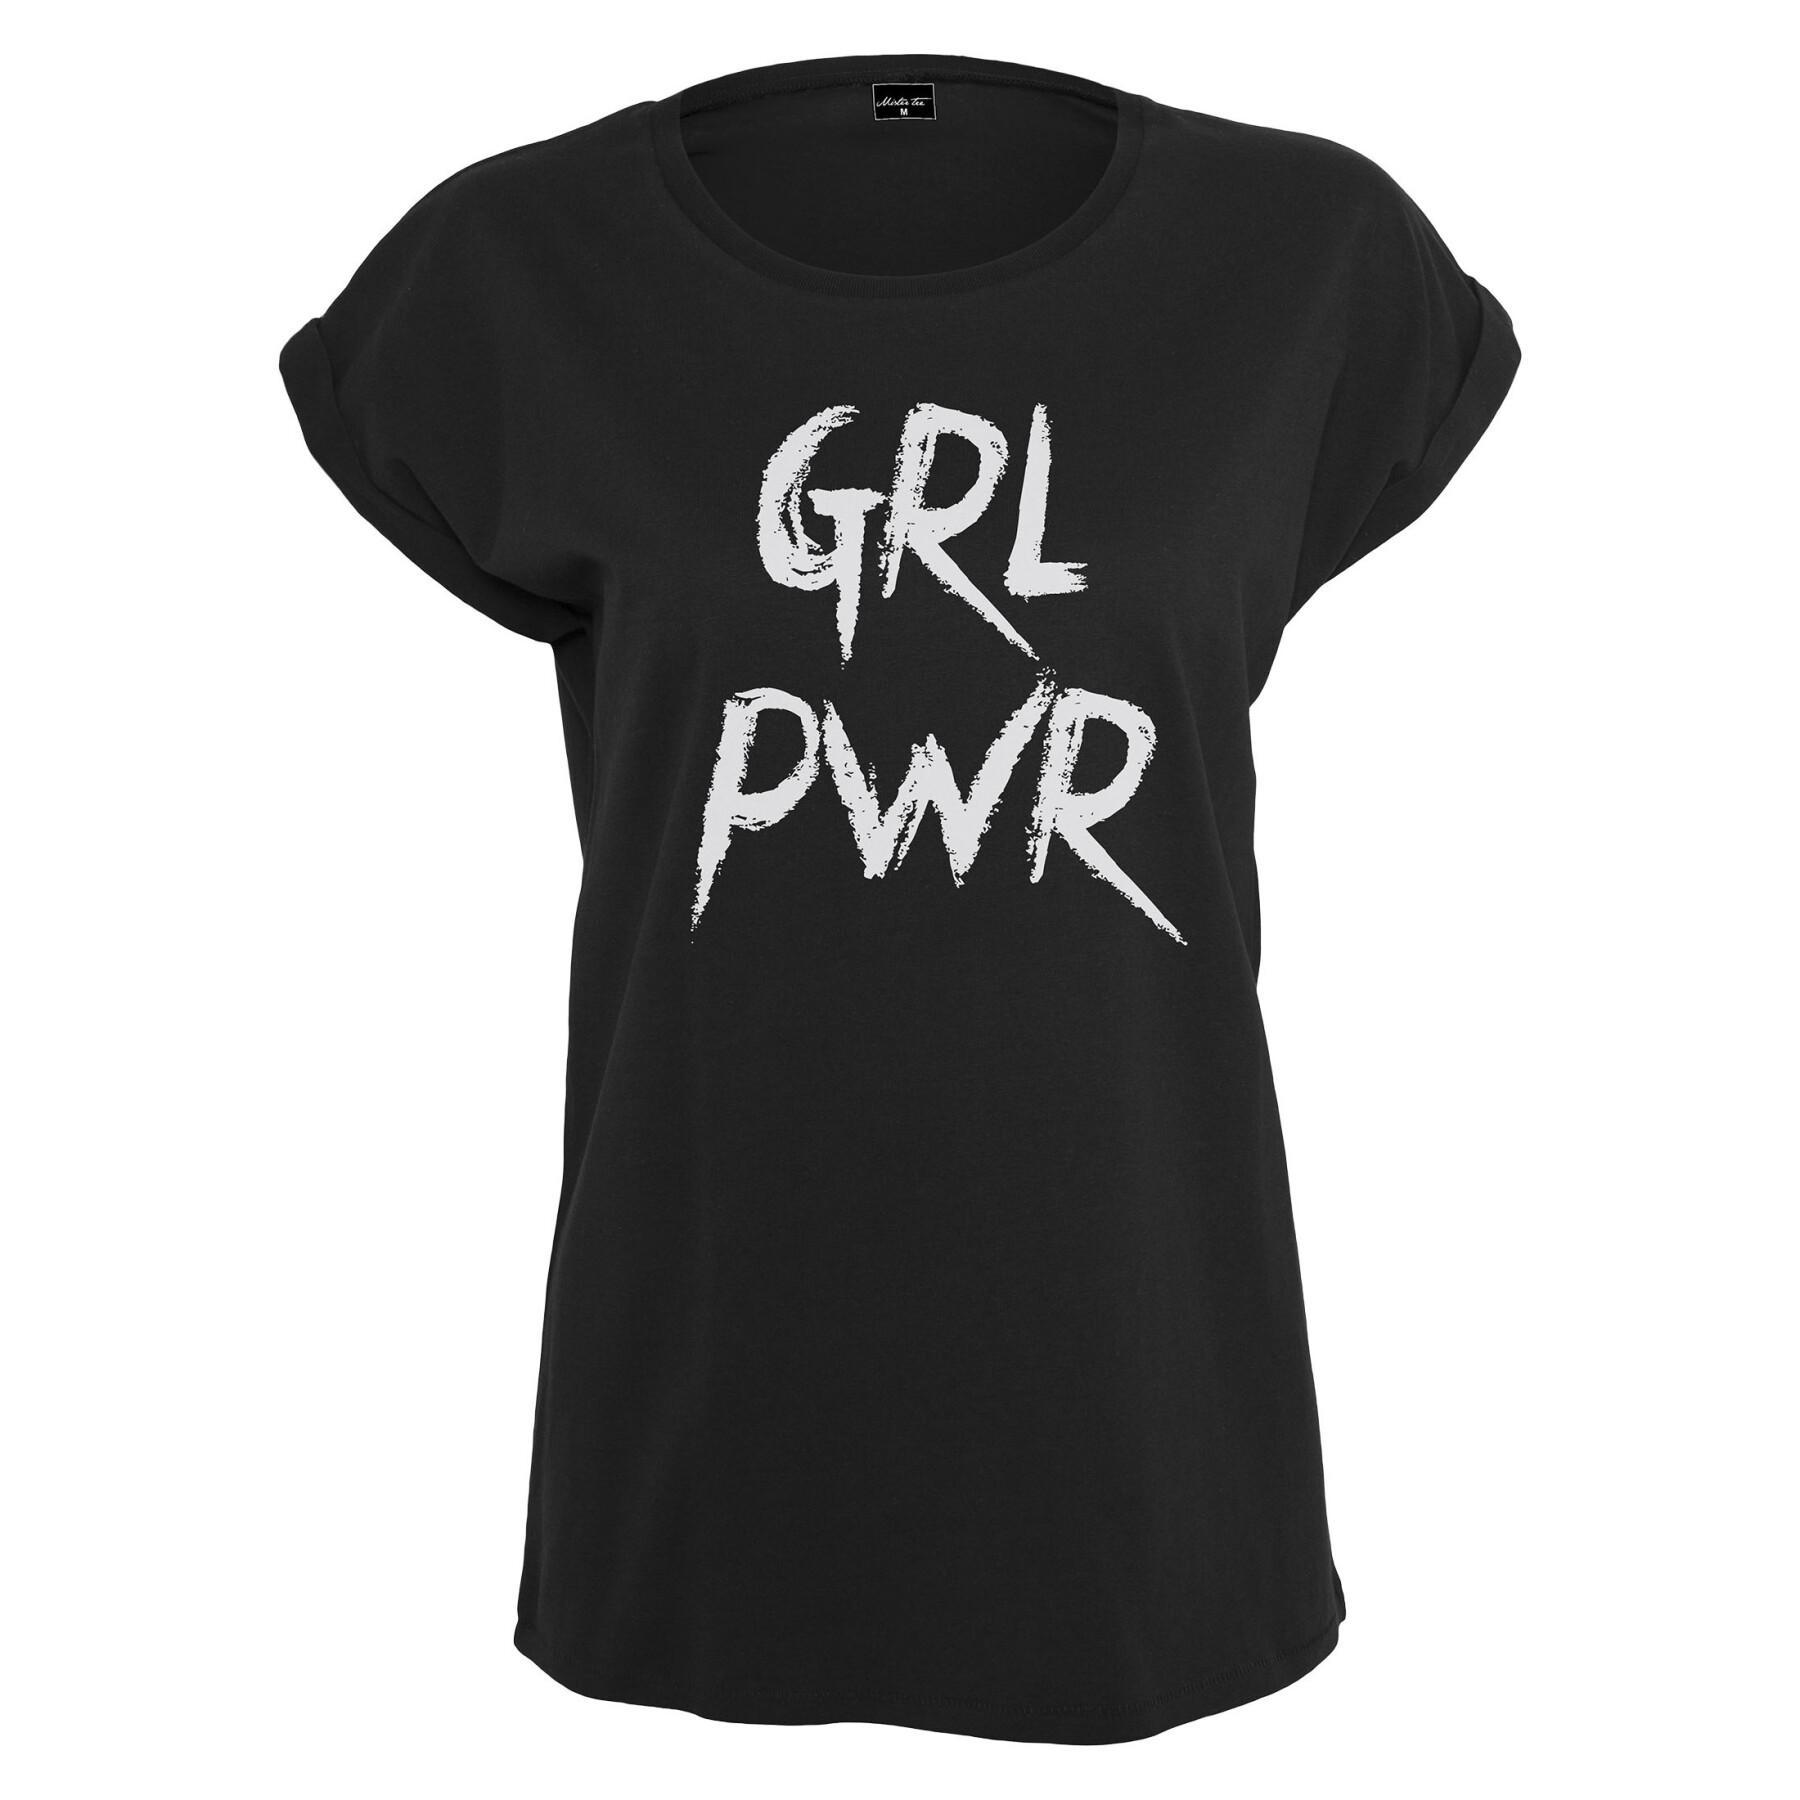 Women's large size T-shirt Mister Tee GRL PWR